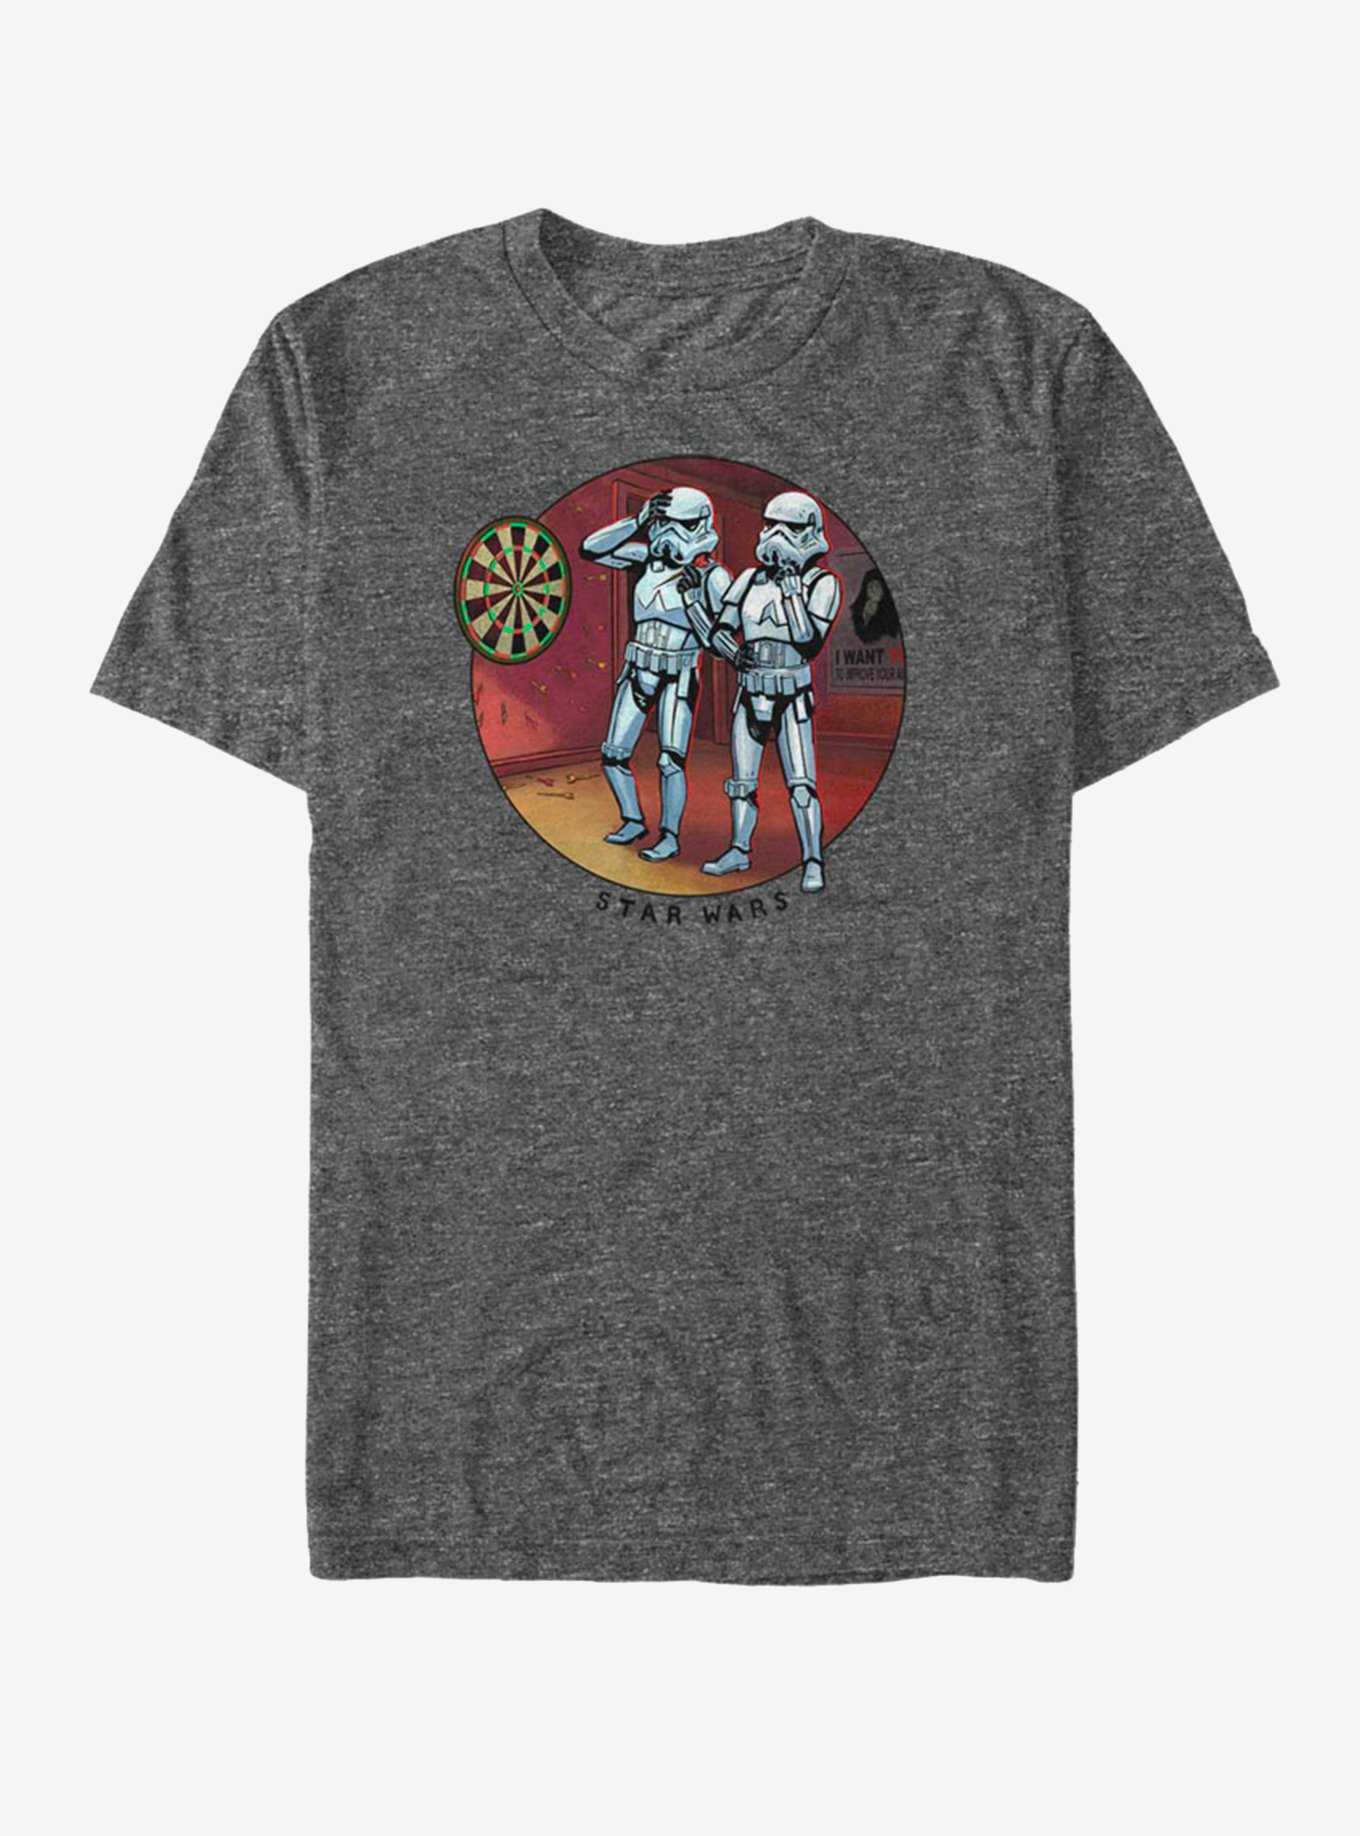 Star Wars Missed Opportunity T-Shirt, , hi-res